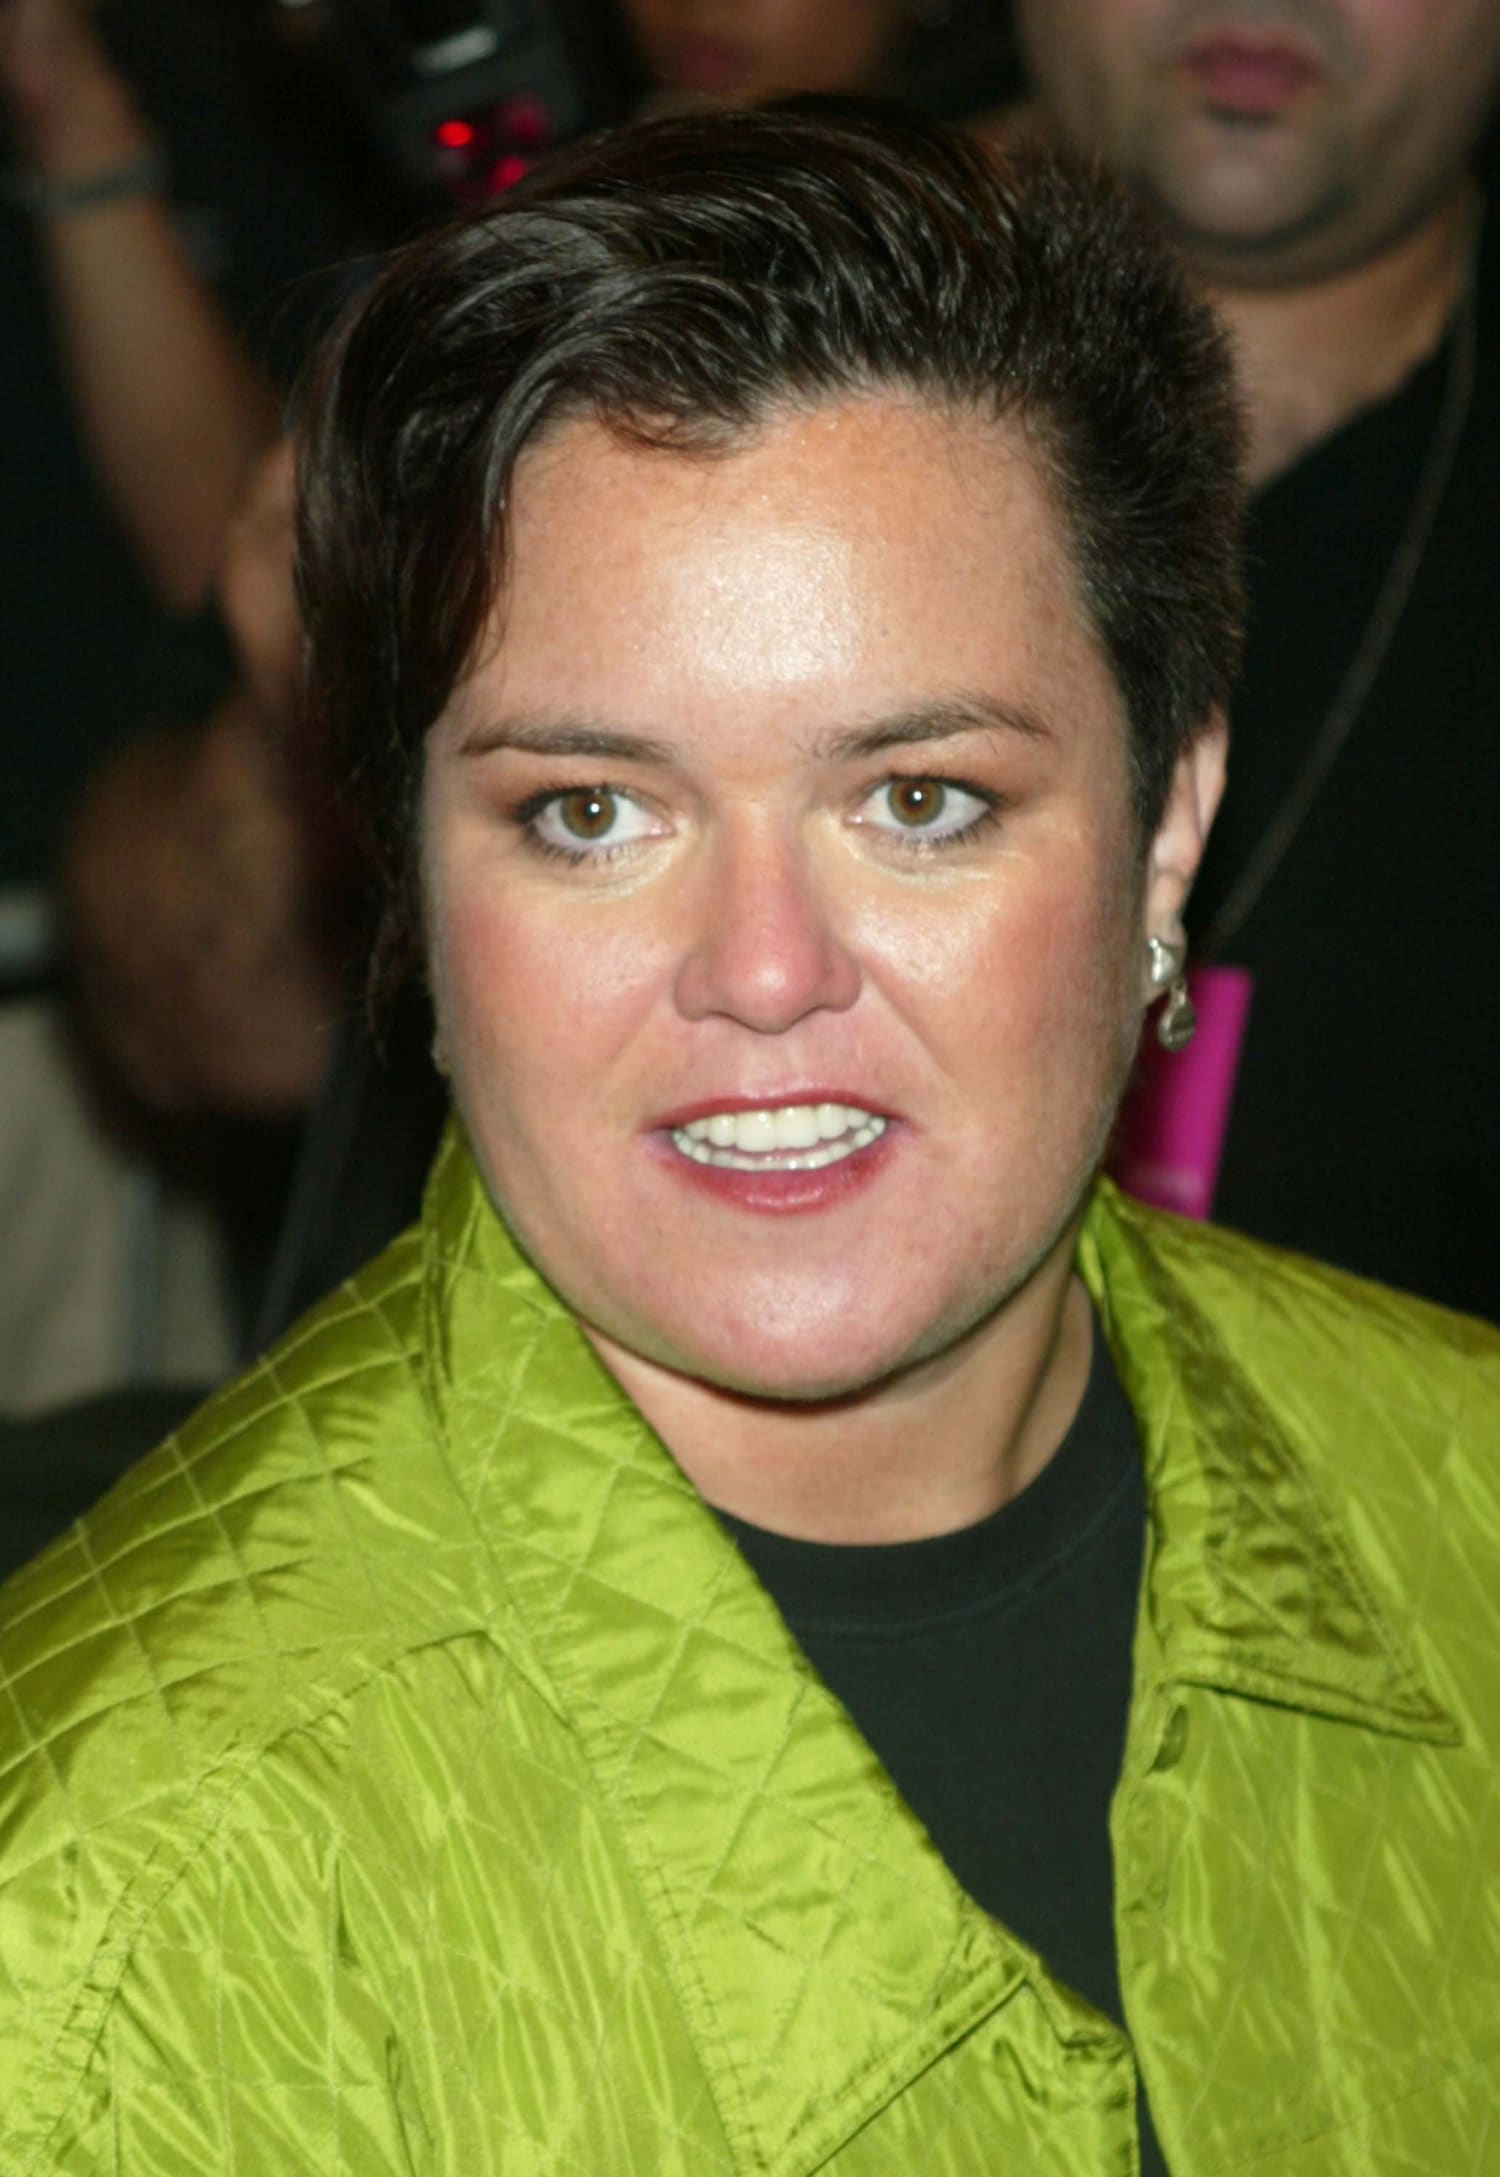 rosie-odonnell-debuts-new-pixie-haircut-today-inline-190409-003.jpg